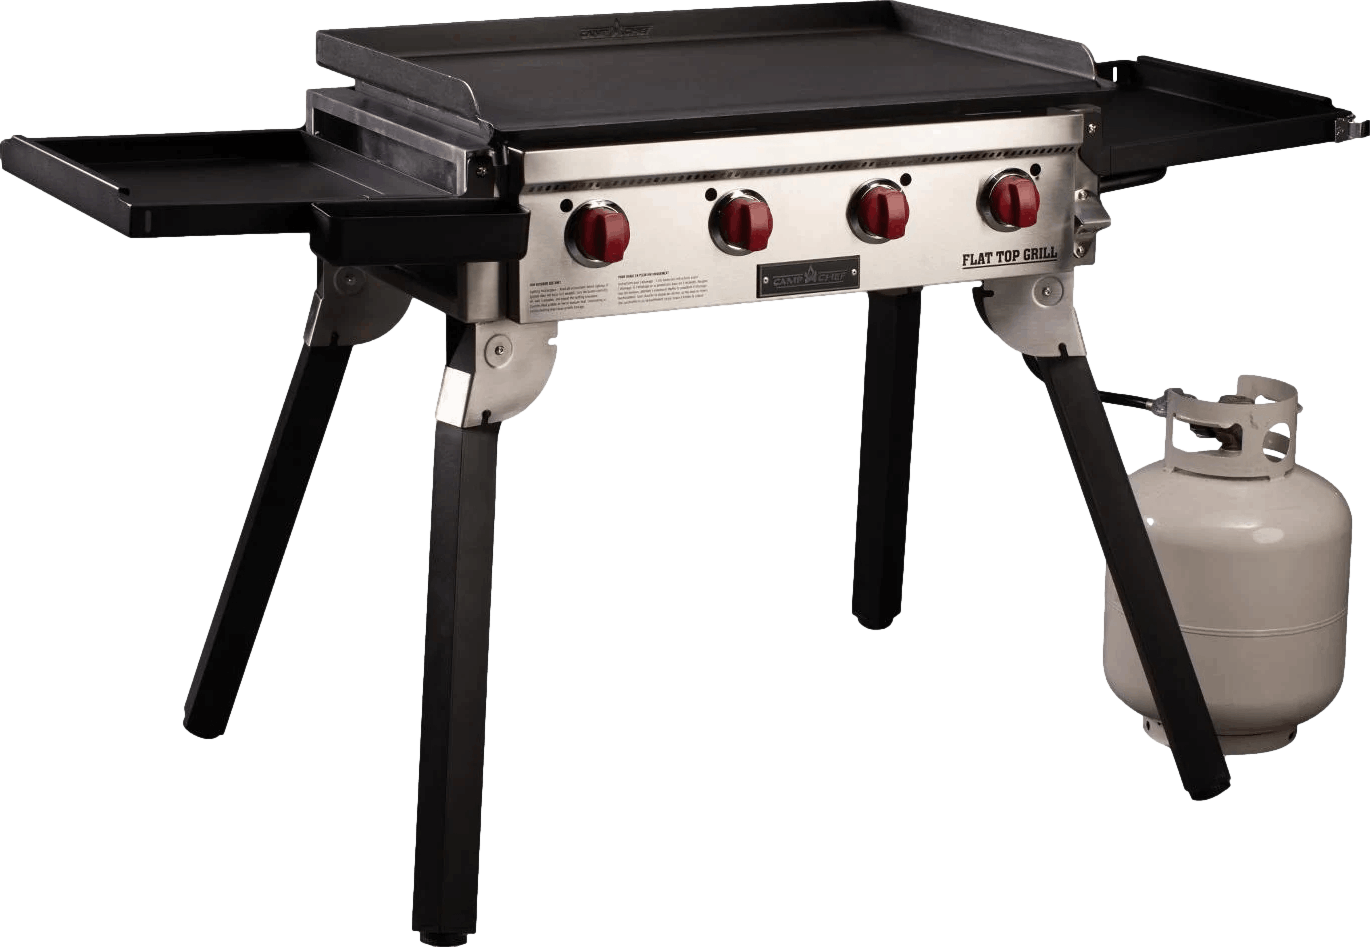 Camp Chef 600 4-Burner Portable Flat Top Gas Grill